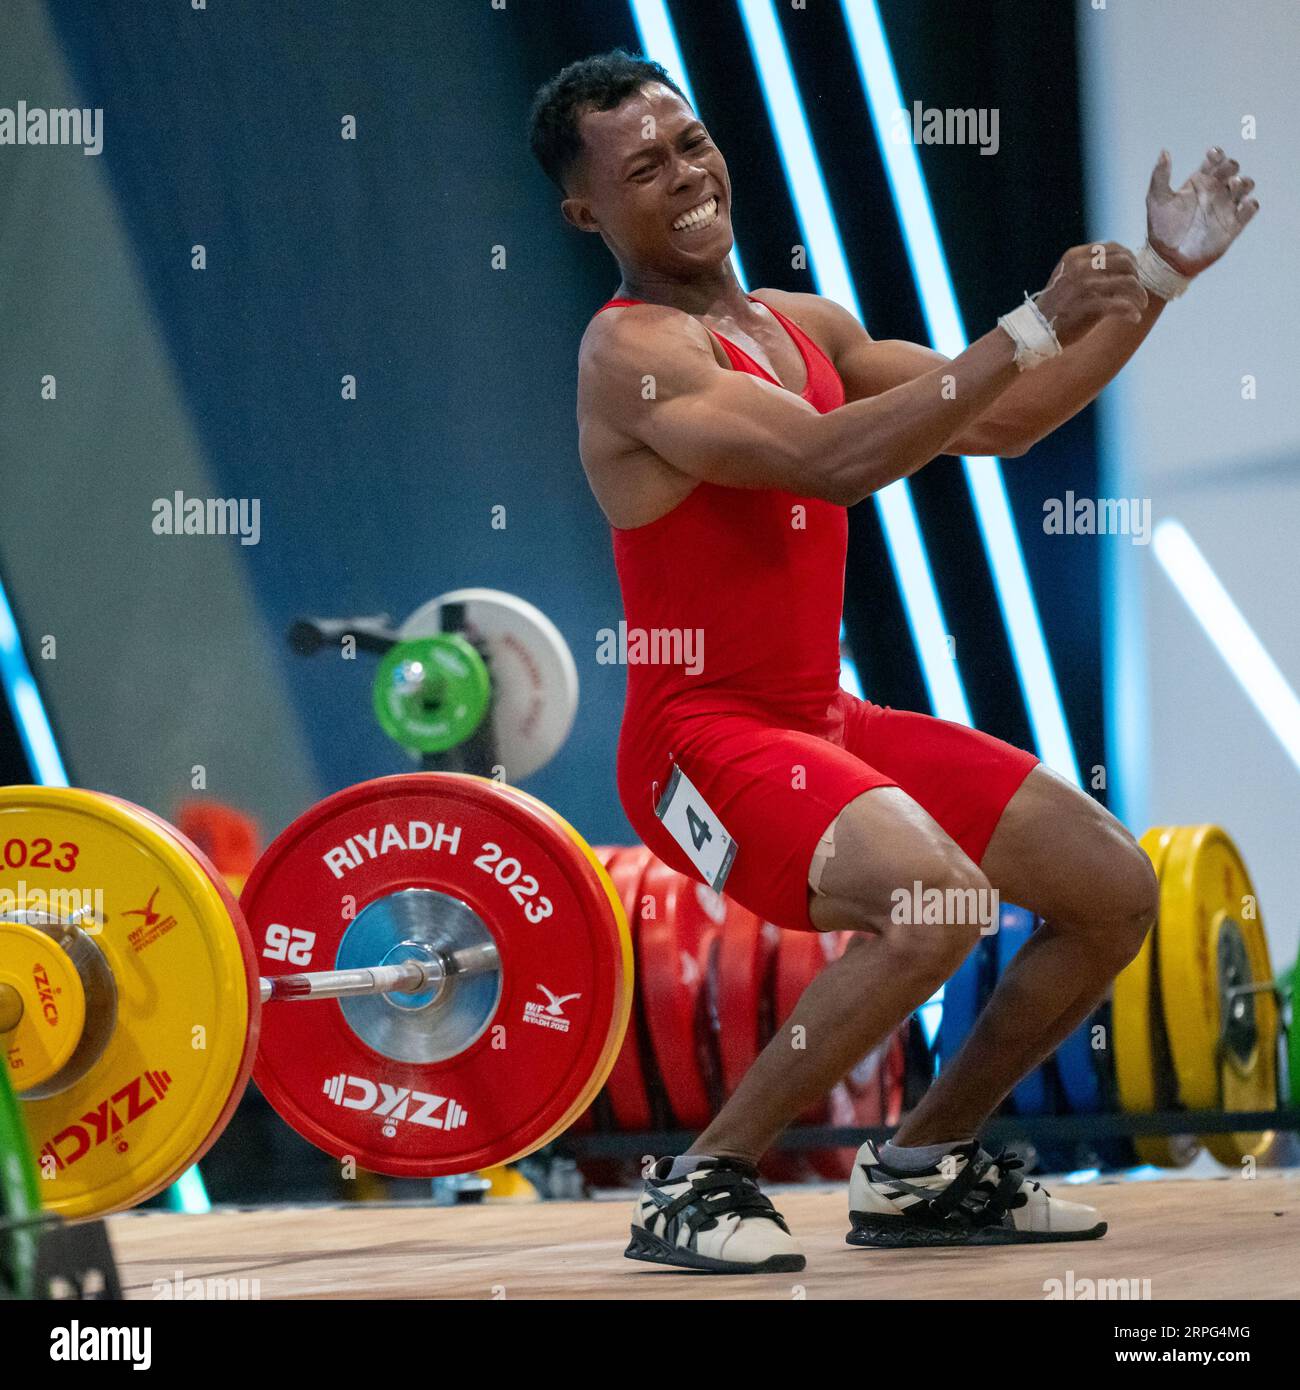 weightlifting live stream